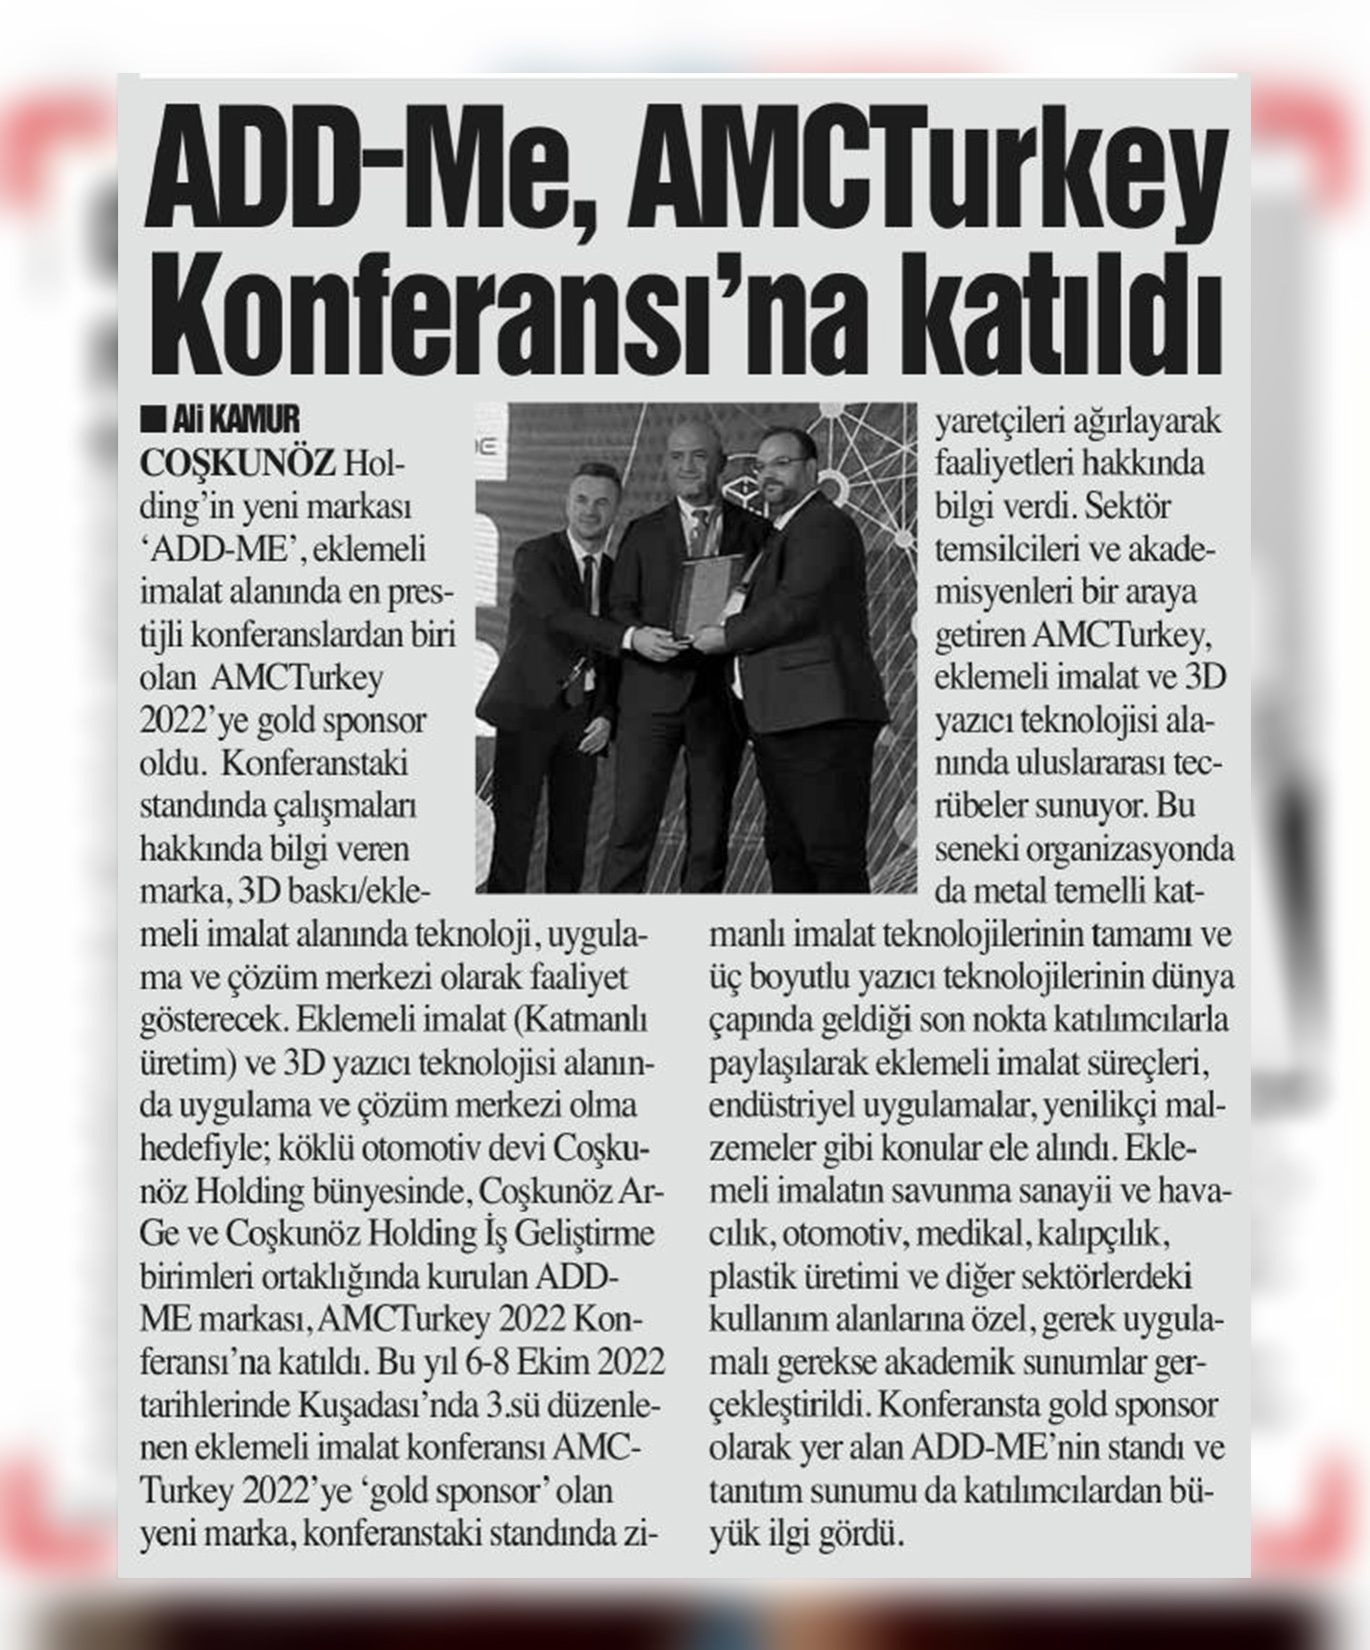 ADD-ME ATTENDED AMCTURKEY CONFERENCE